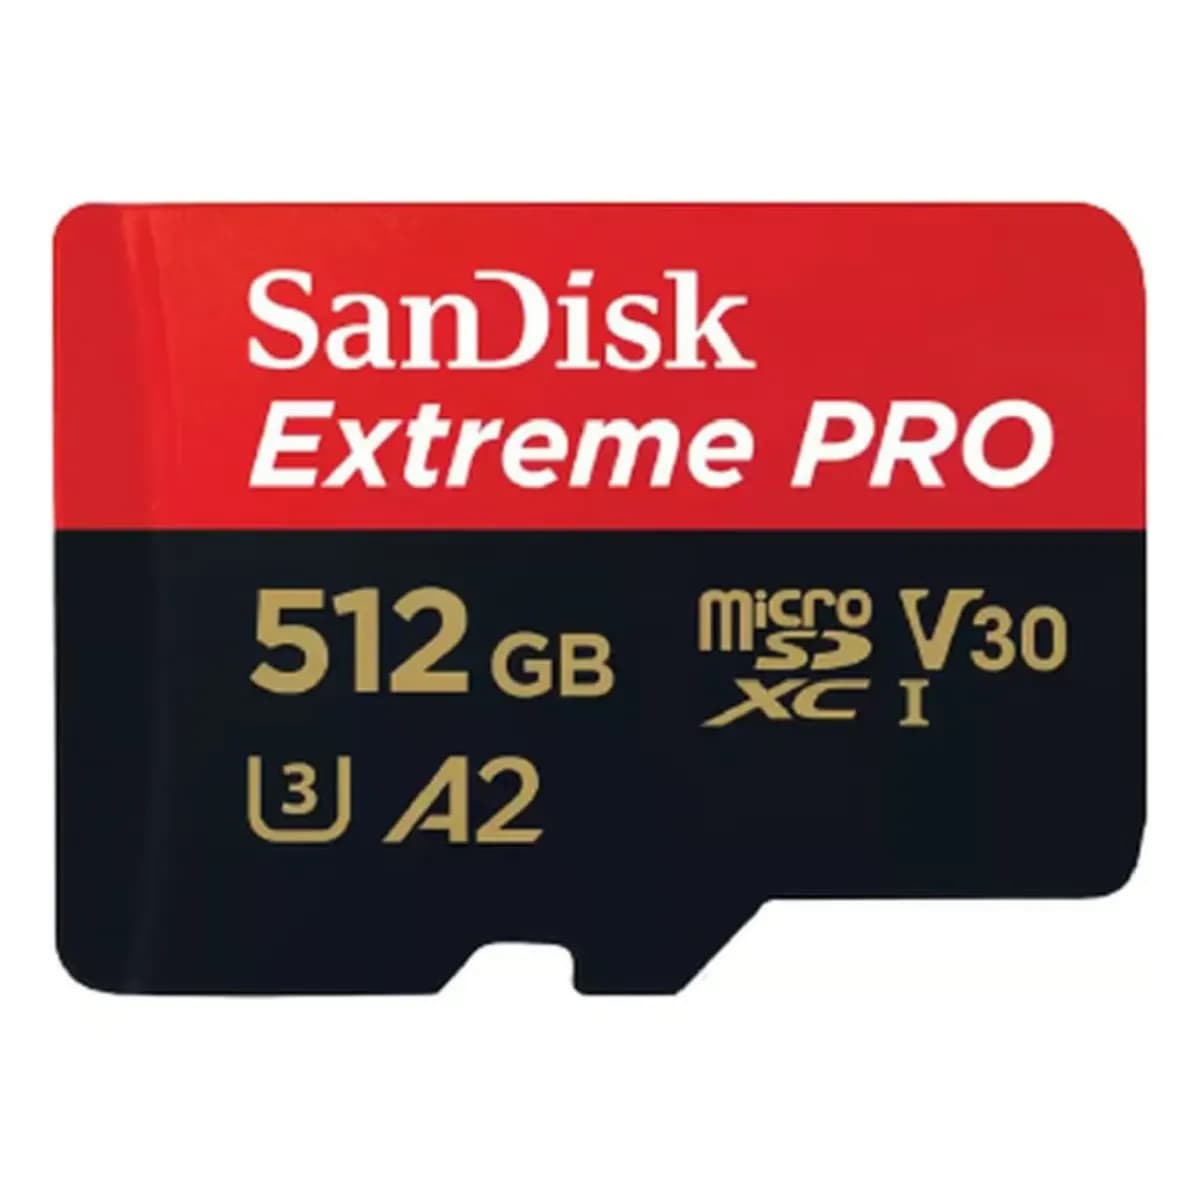 SanDisk Extreme PRO microSD SDSQXCD 512GB MEMMORY CARD 